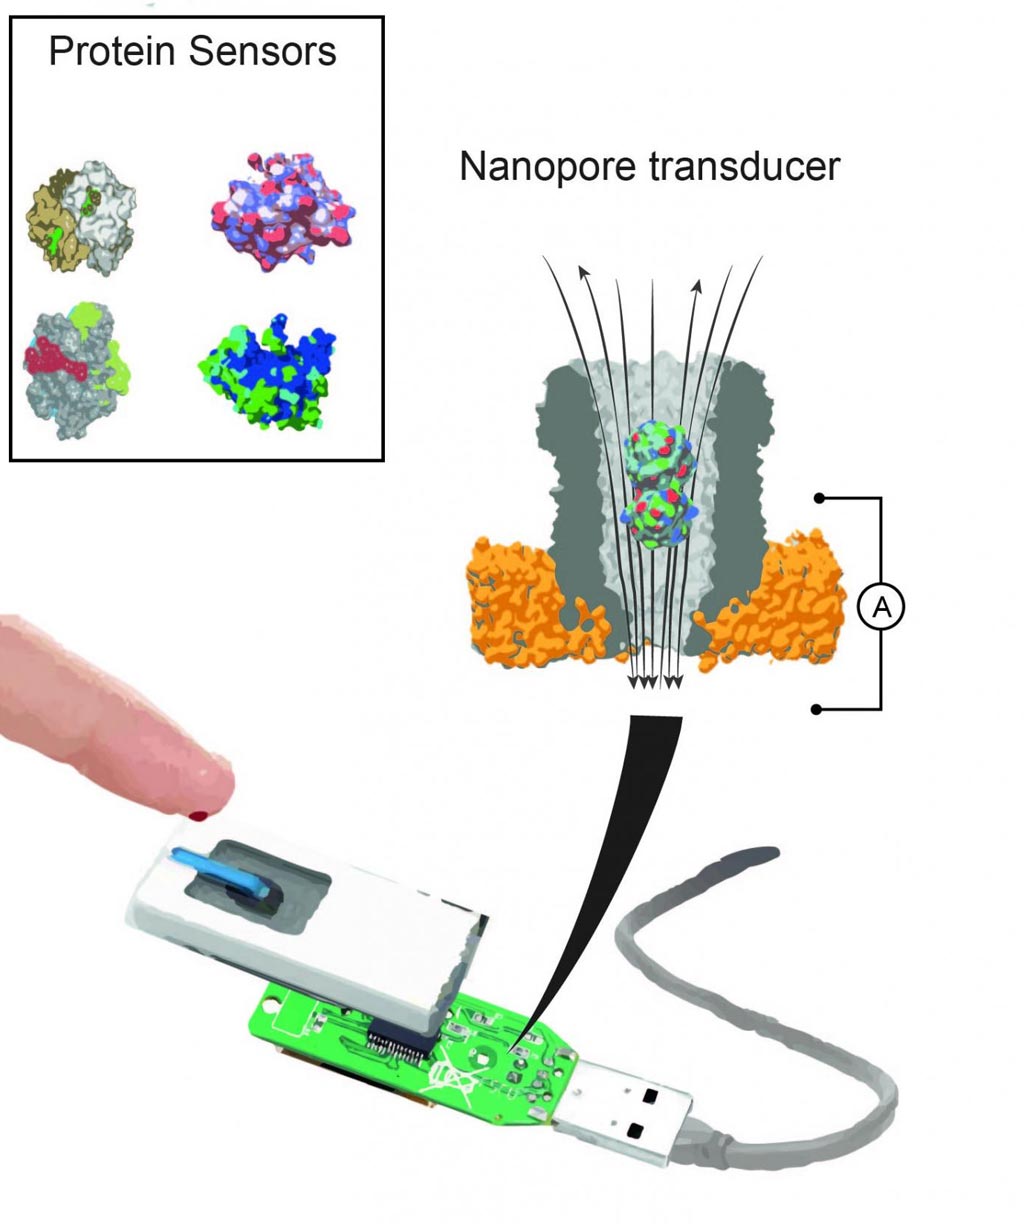 Image: A nanopore device can contain different binding proteins. Once inside the pore, these proteins act as transducers to identify specific small molecules in a sample of body fluid (Photo courtesy of Dr. Giovanni Maglia, University of Groningen).